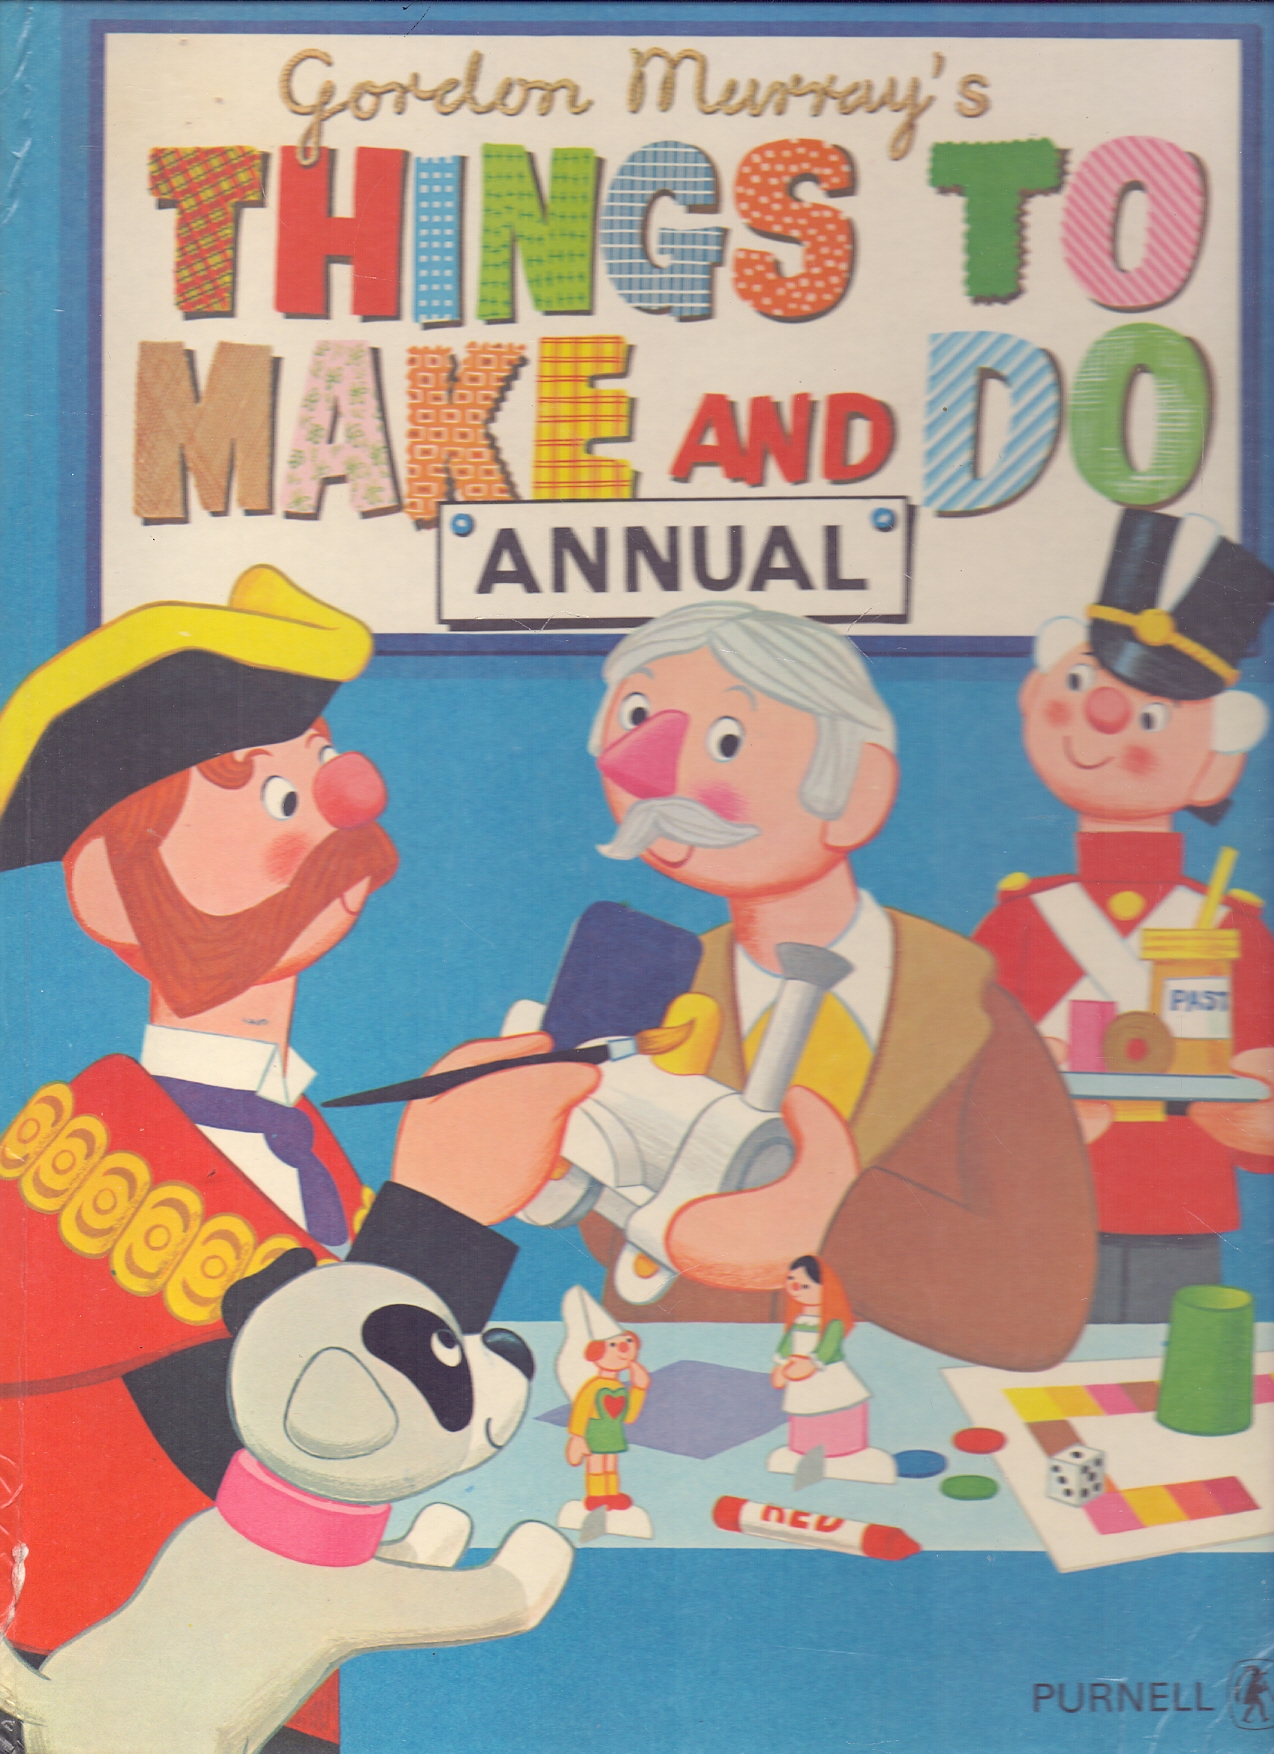 Things to make and do annual Gordon Murray